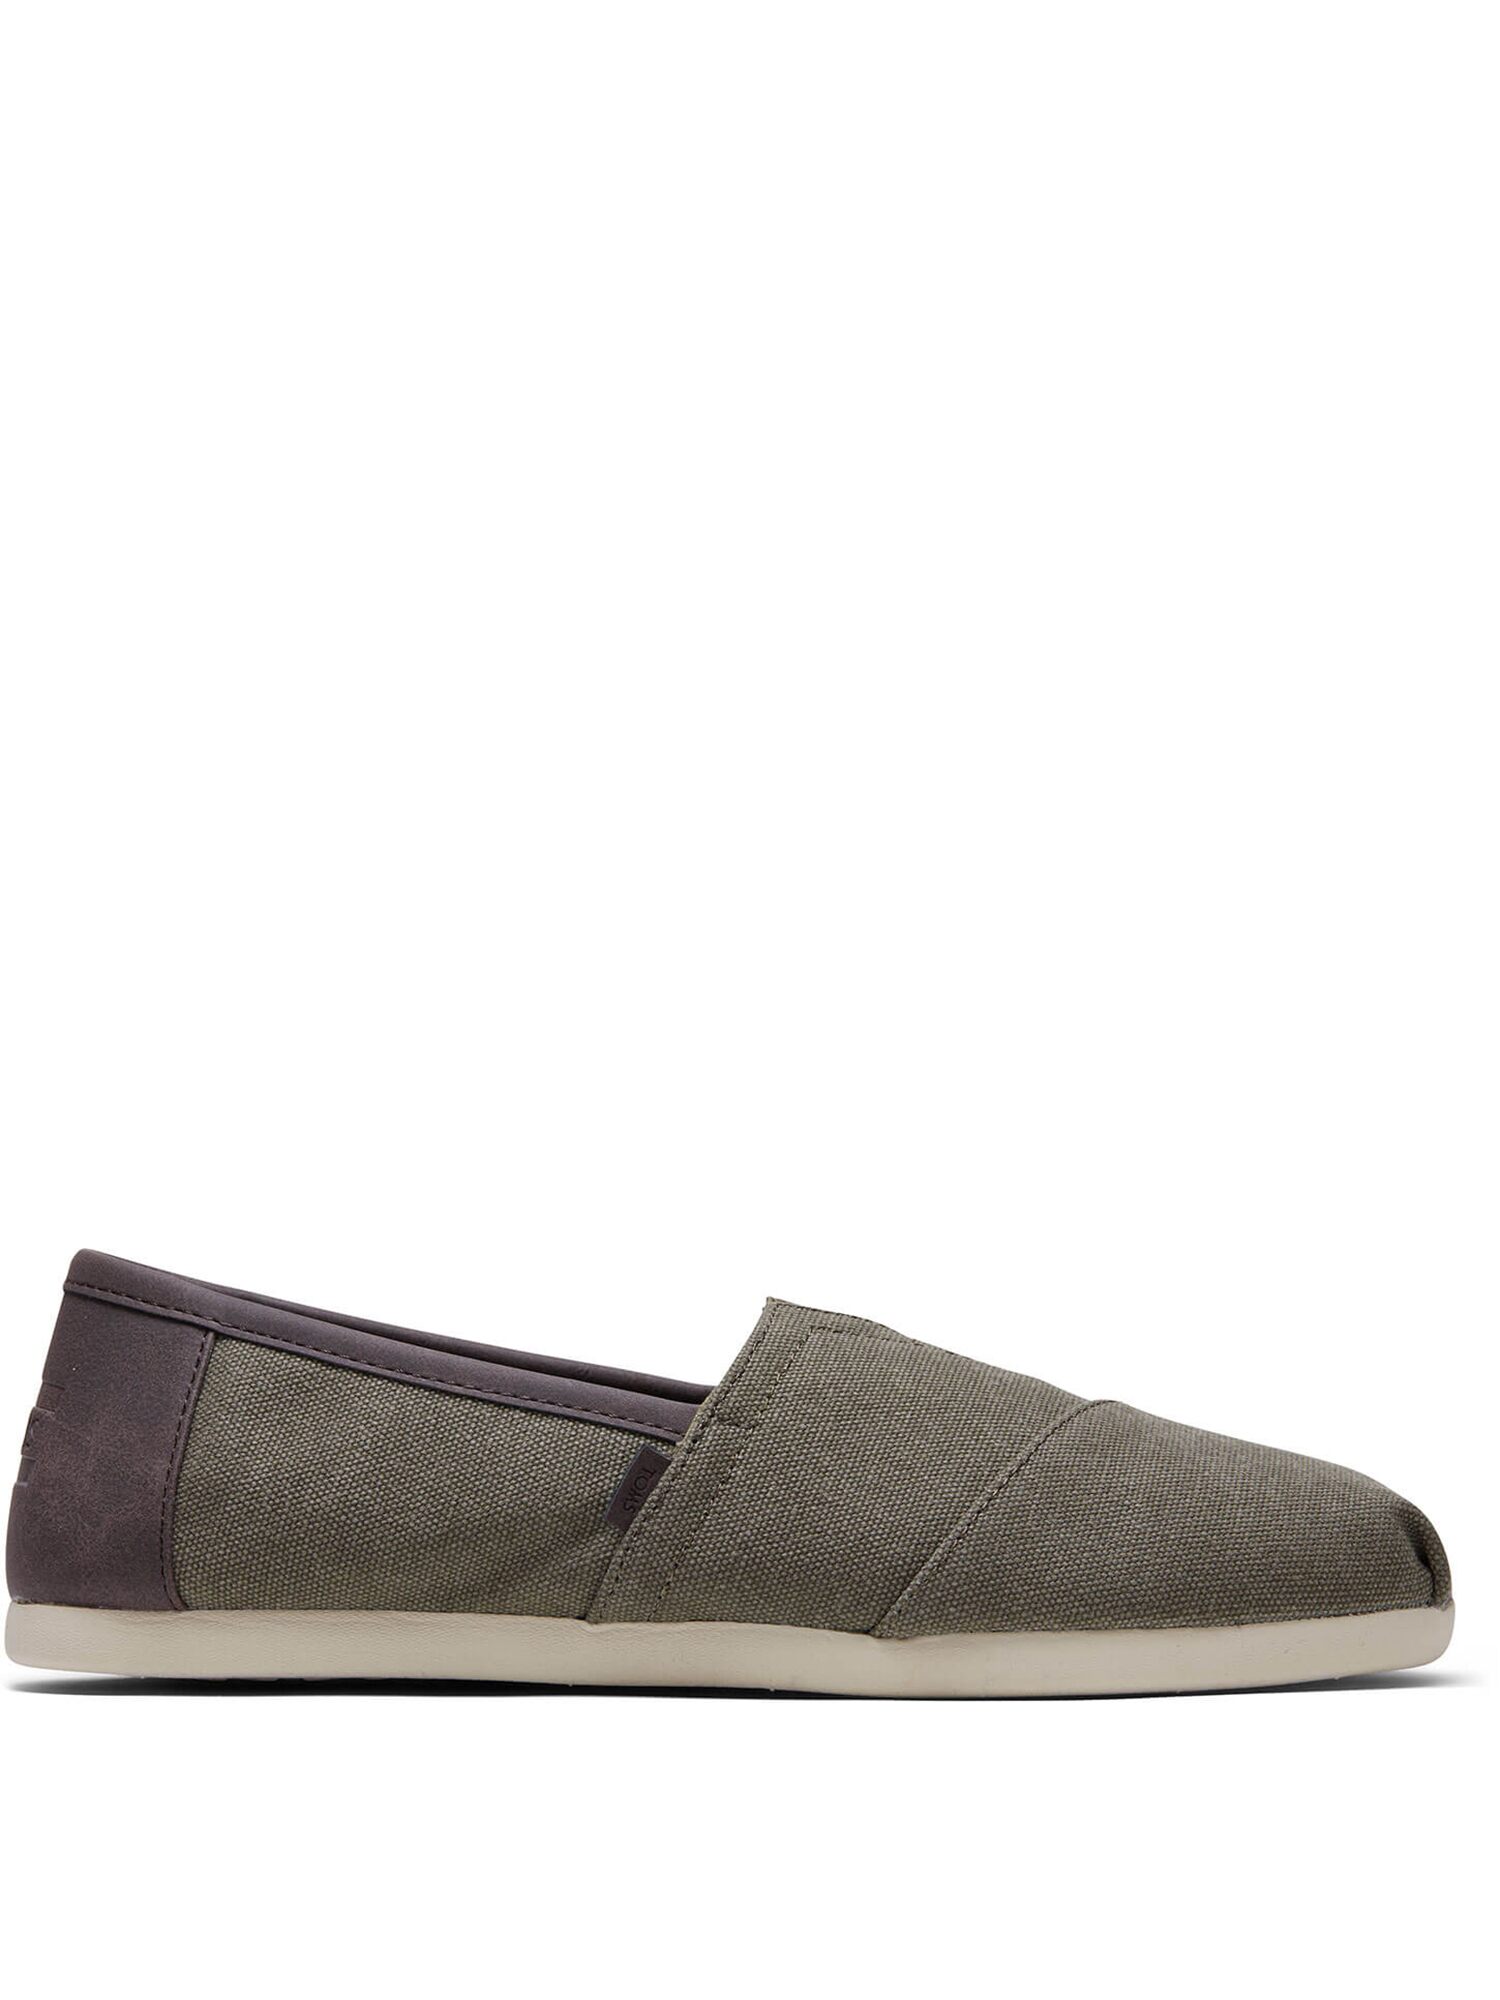 TOMS Men's Washed Canvas Classic Slip-On Shoes ft. Ortholite - image 1 of 3